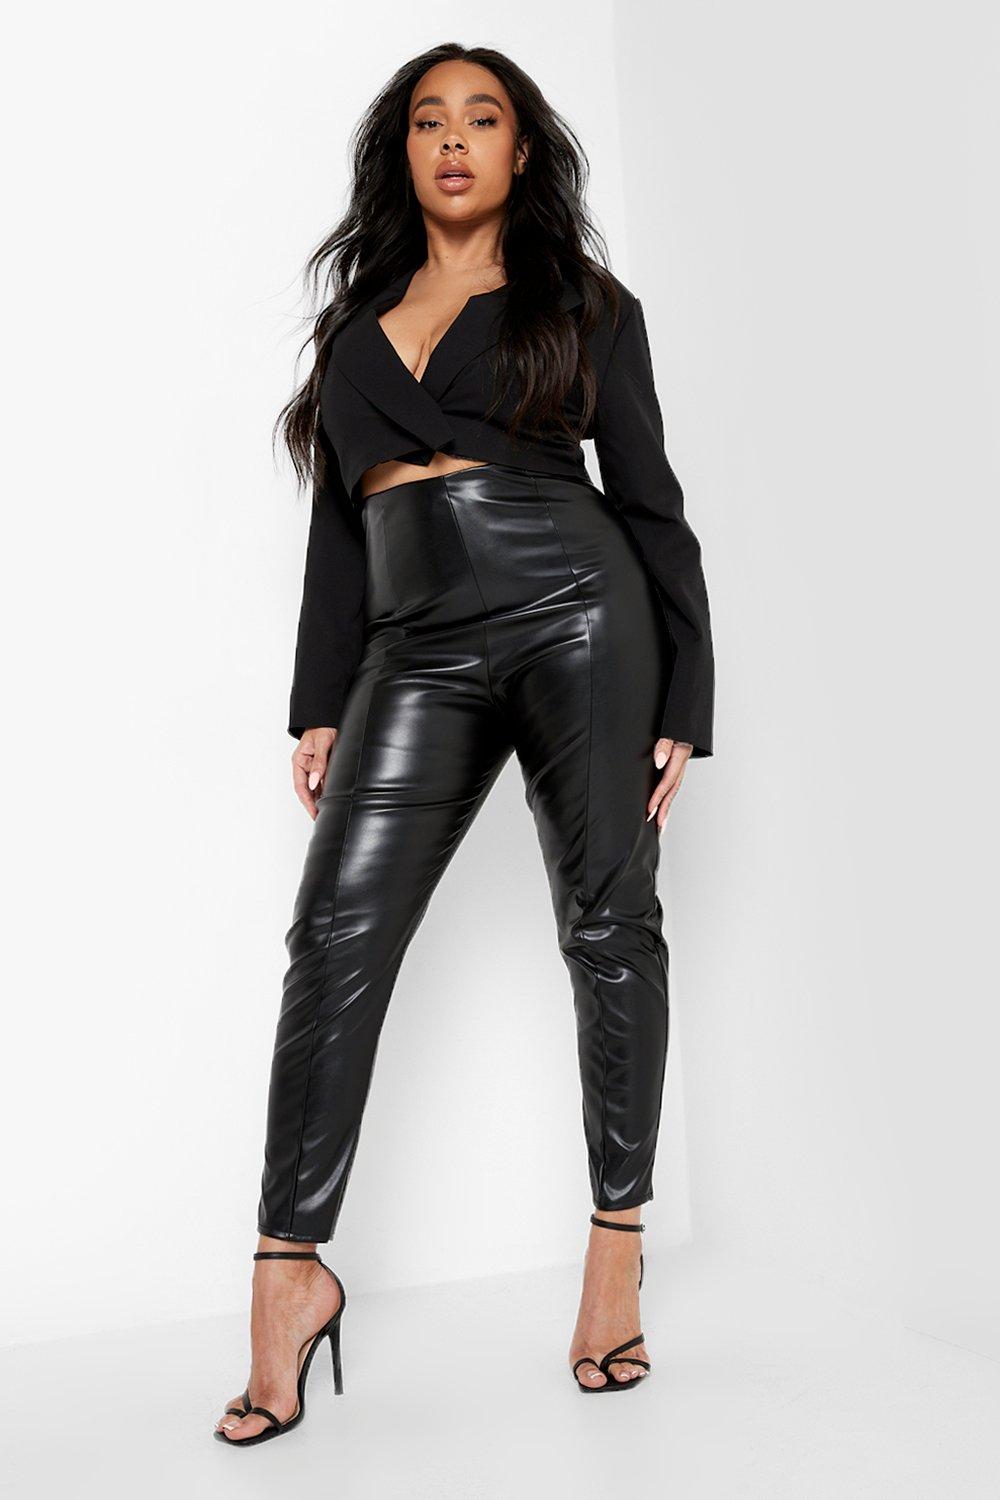 Black PU Faux Leather High Waist Skinny Leggings For Women Autumn Street  Style High Waisted Leather Trousers In Plus Size A From Yutougui, $26.64 |  DHgate.Com